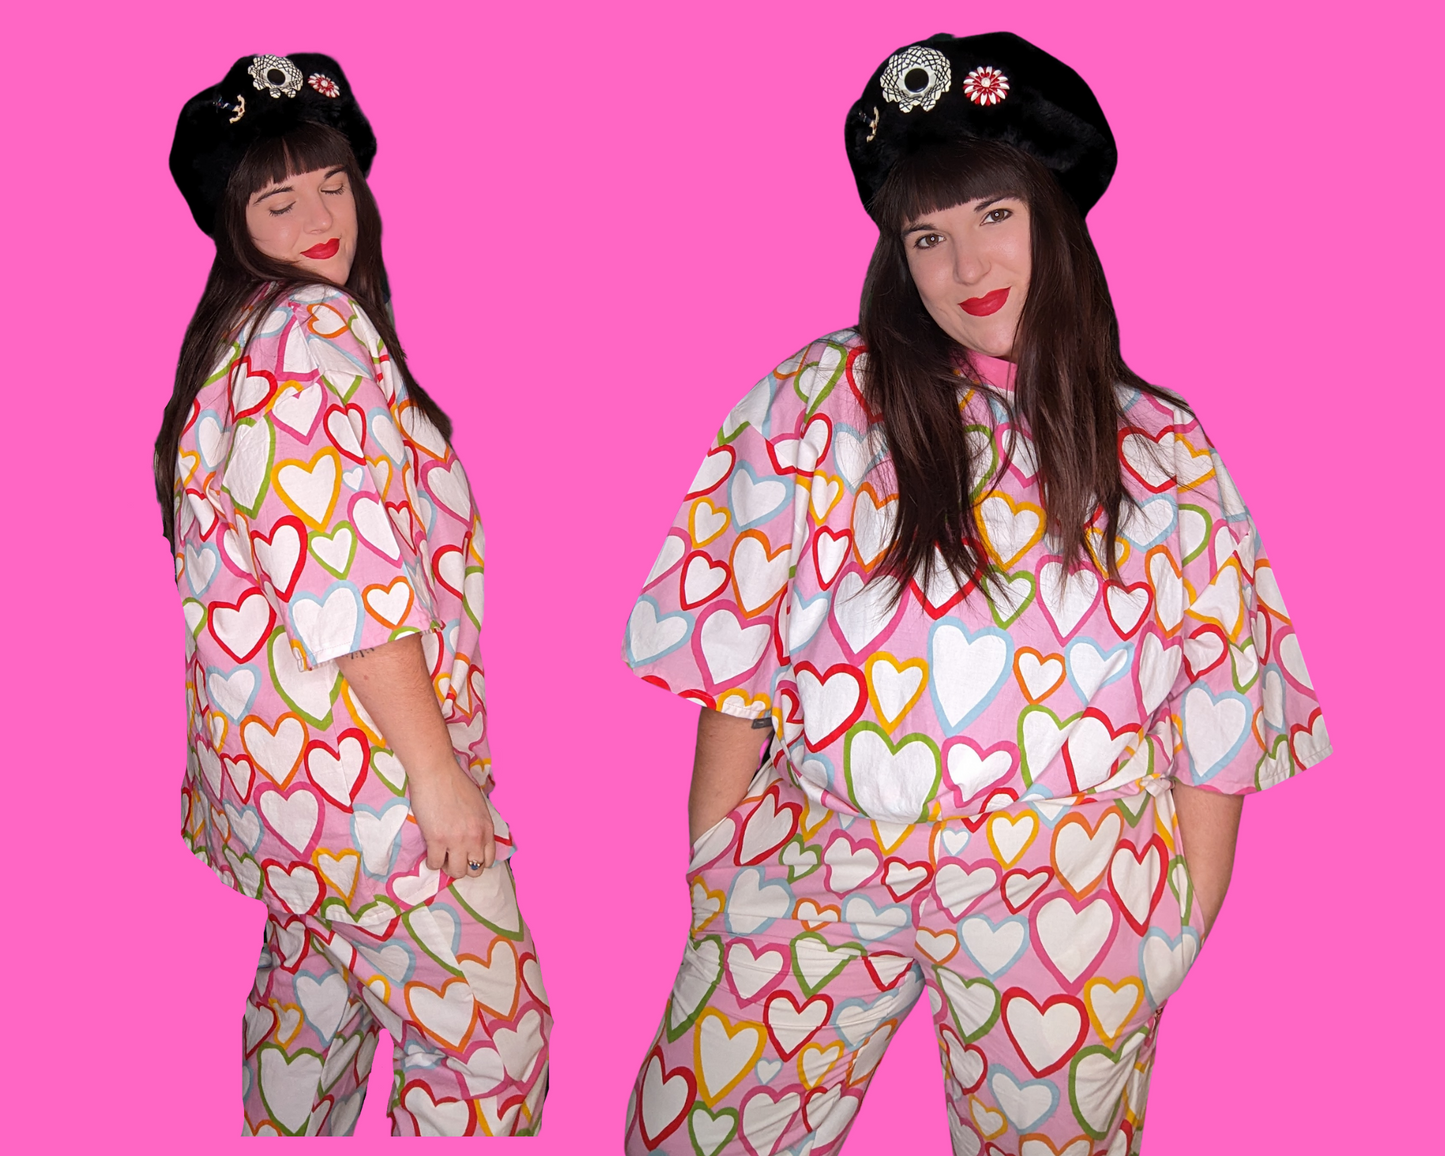 Handmade, Upcycled Pink and Rainbow Hearts Patterned Fabric Pajama Set, T-Shirt and Bottoms, Size M and 2XL